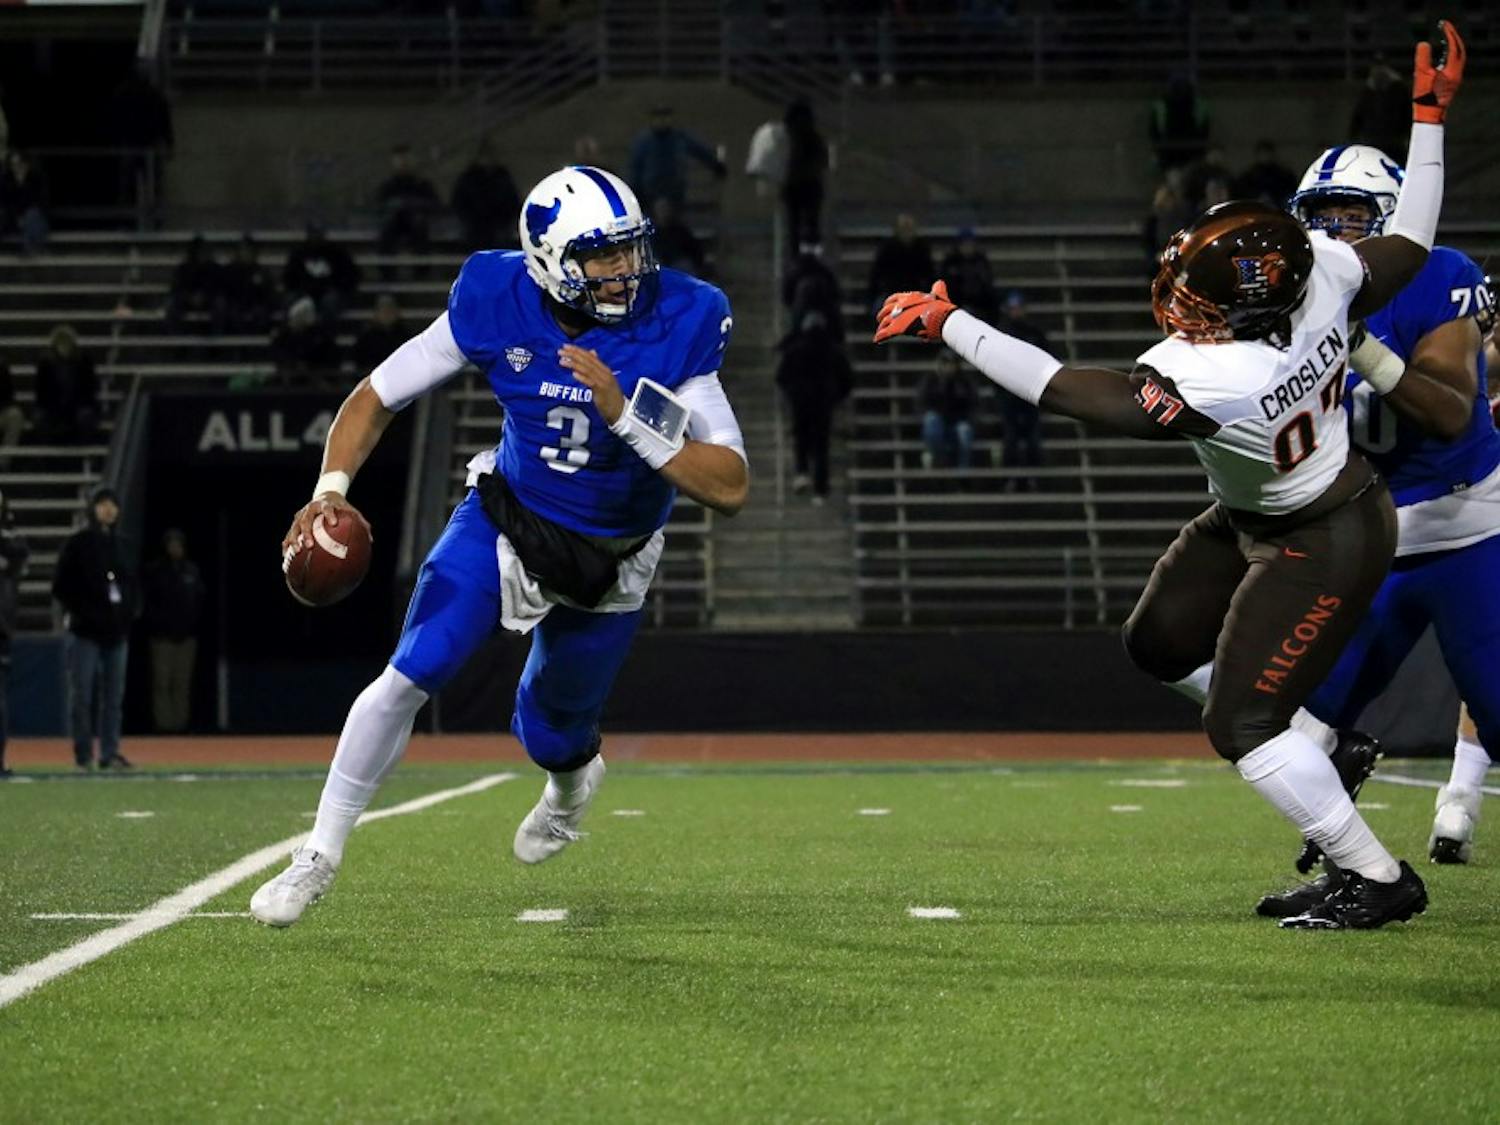 Sophomore quarterback Tyree Jackson running out of the pocket. Jackson lead the Bulls to a 38-28 win over the Bowling Green Falcons Tuesday night.